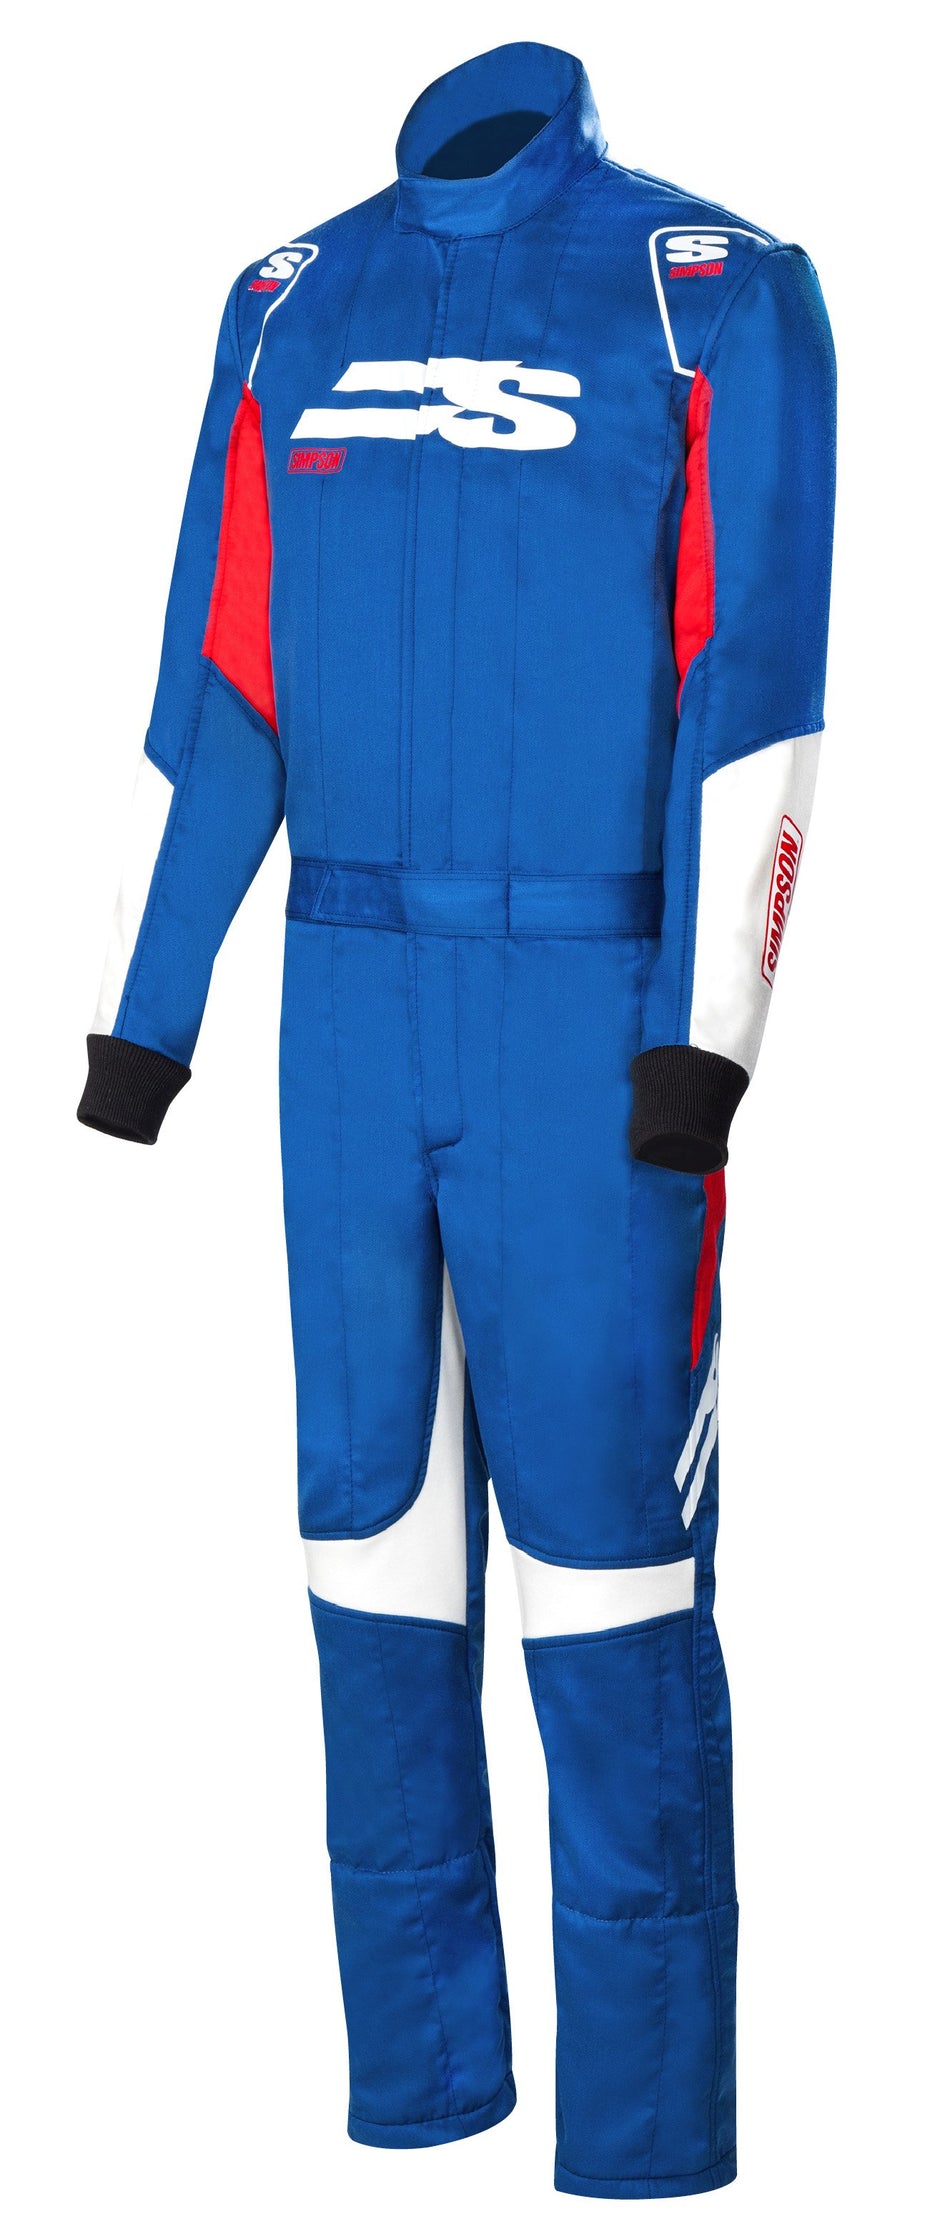 Simpson Airspeed Suit - Blue/Red/White